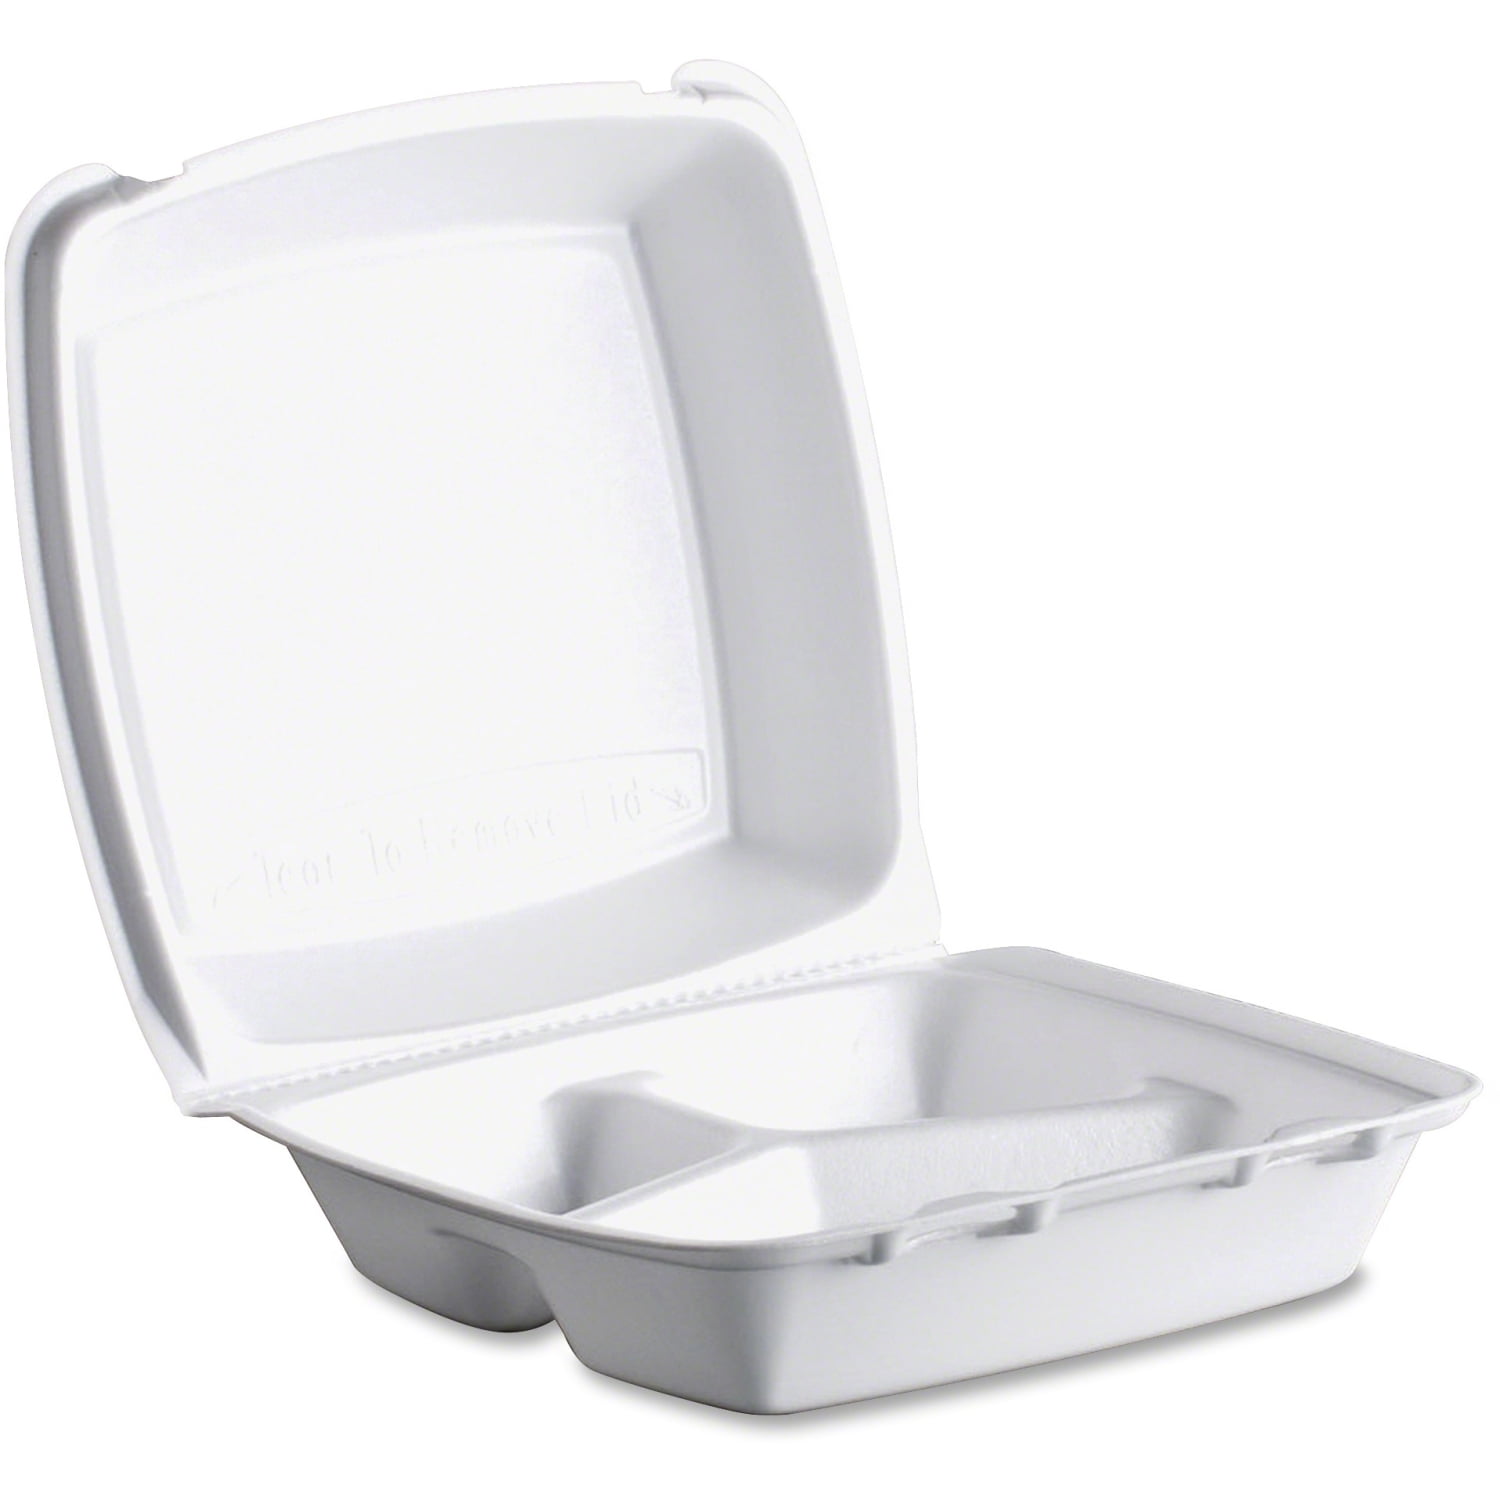 10 PIECES CARRYOUT FOOD FOAM CONTAINERS- FOR HOT & COLD FOODS 3 COMPARTMENTS 